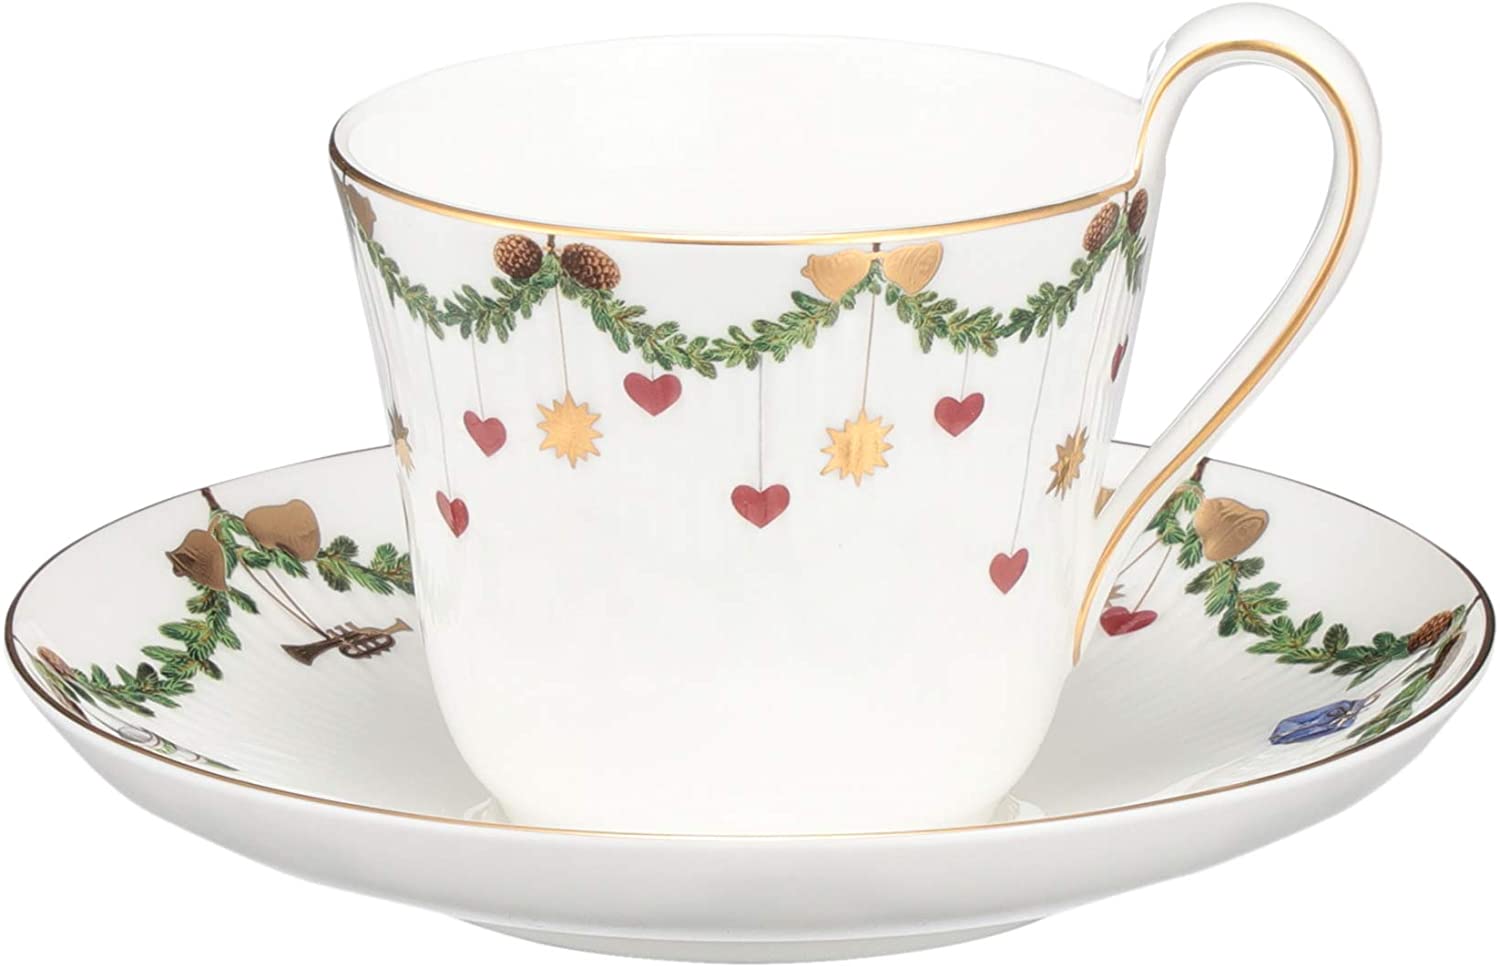 Royal Copenhagen 1017438 Star Fluted/XMAS Top Saucer with High Handles, Porcelain, 240 ml, Multi-Coloured